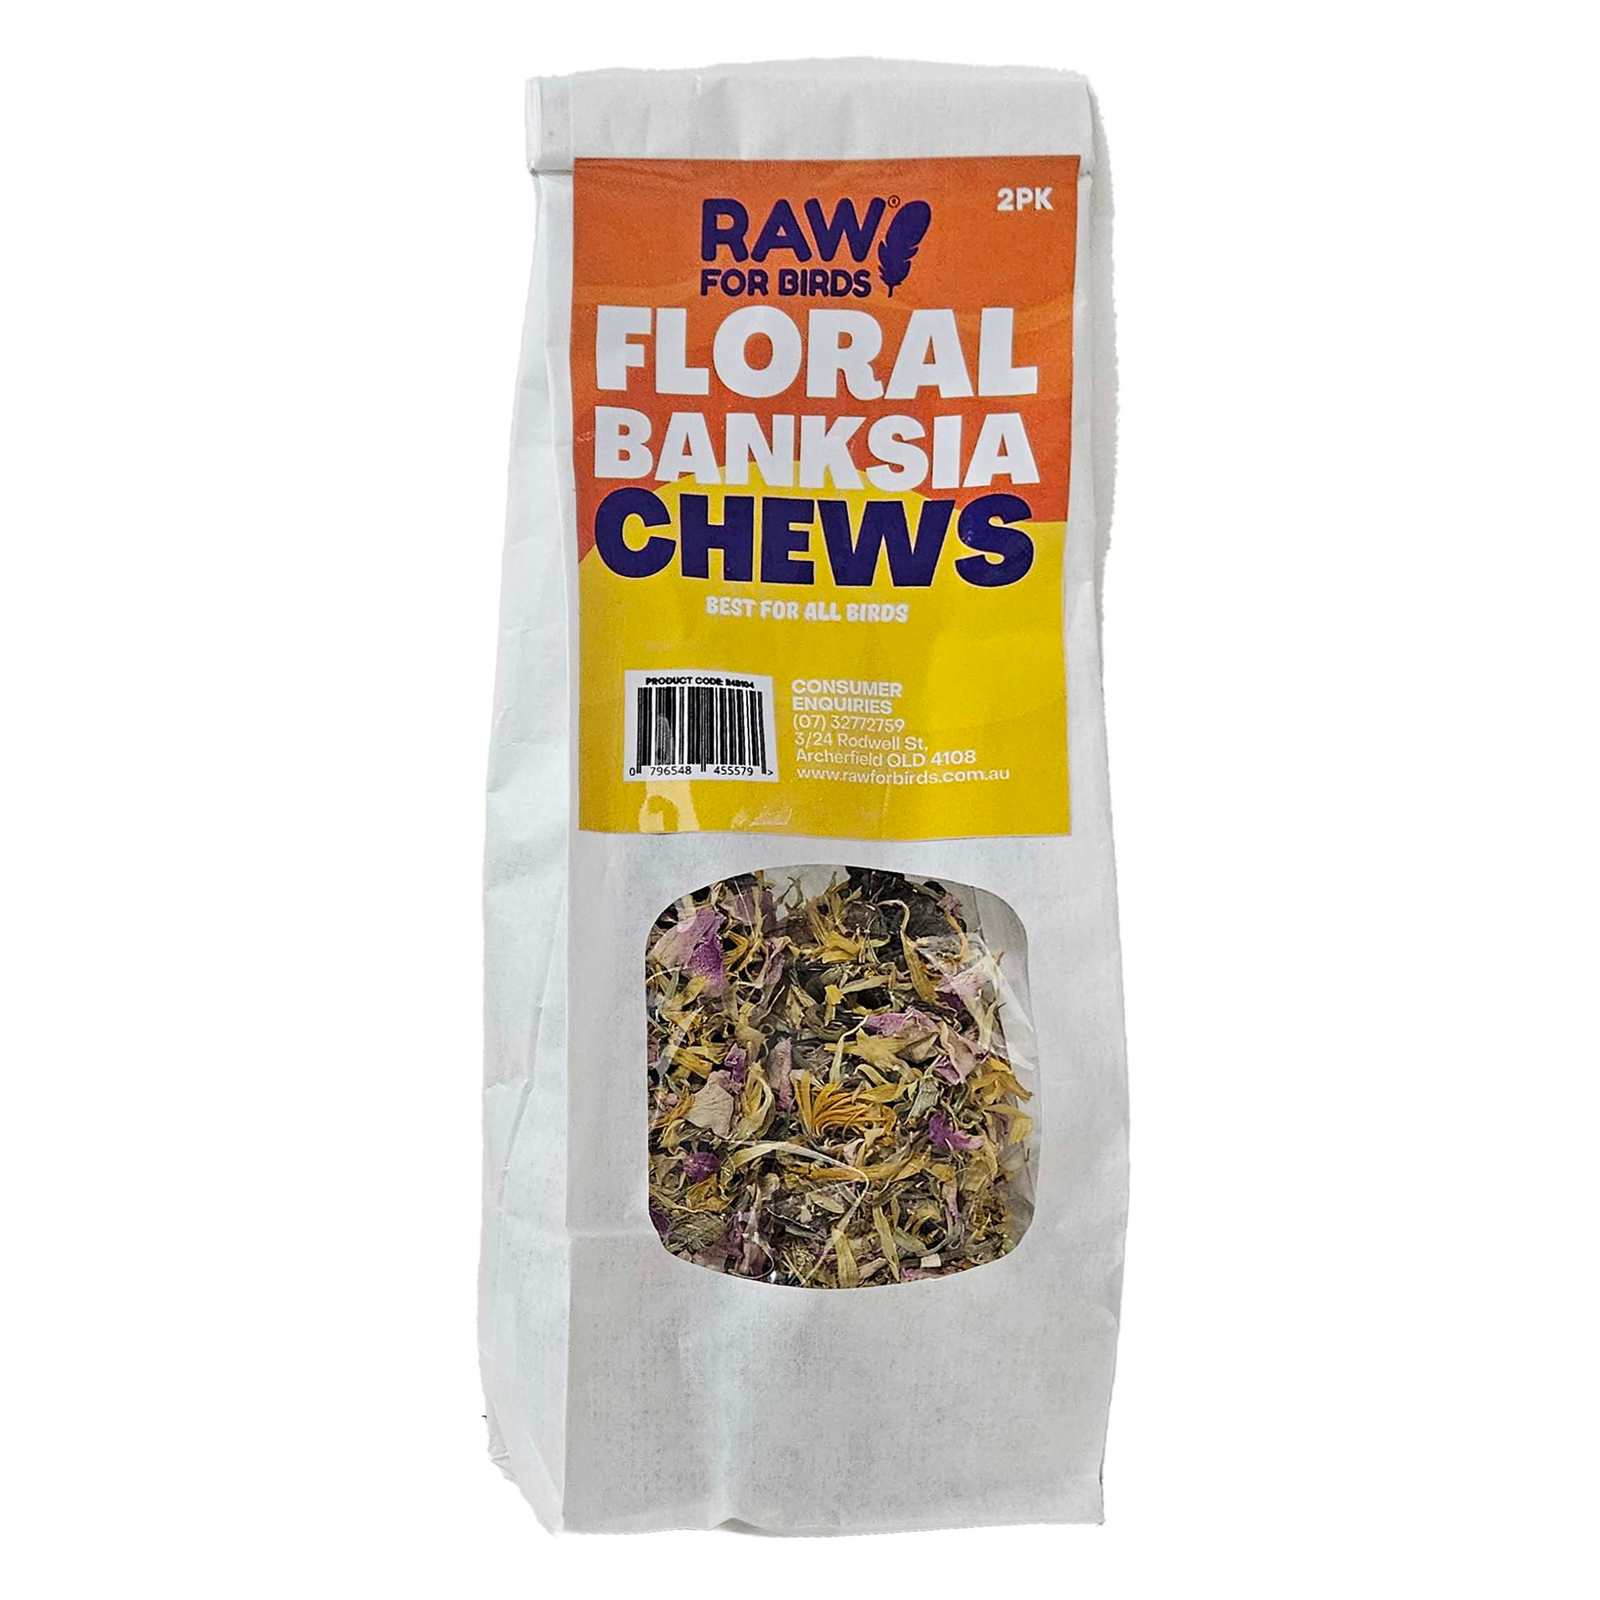 Raw for Birds Floral Banksia Chews